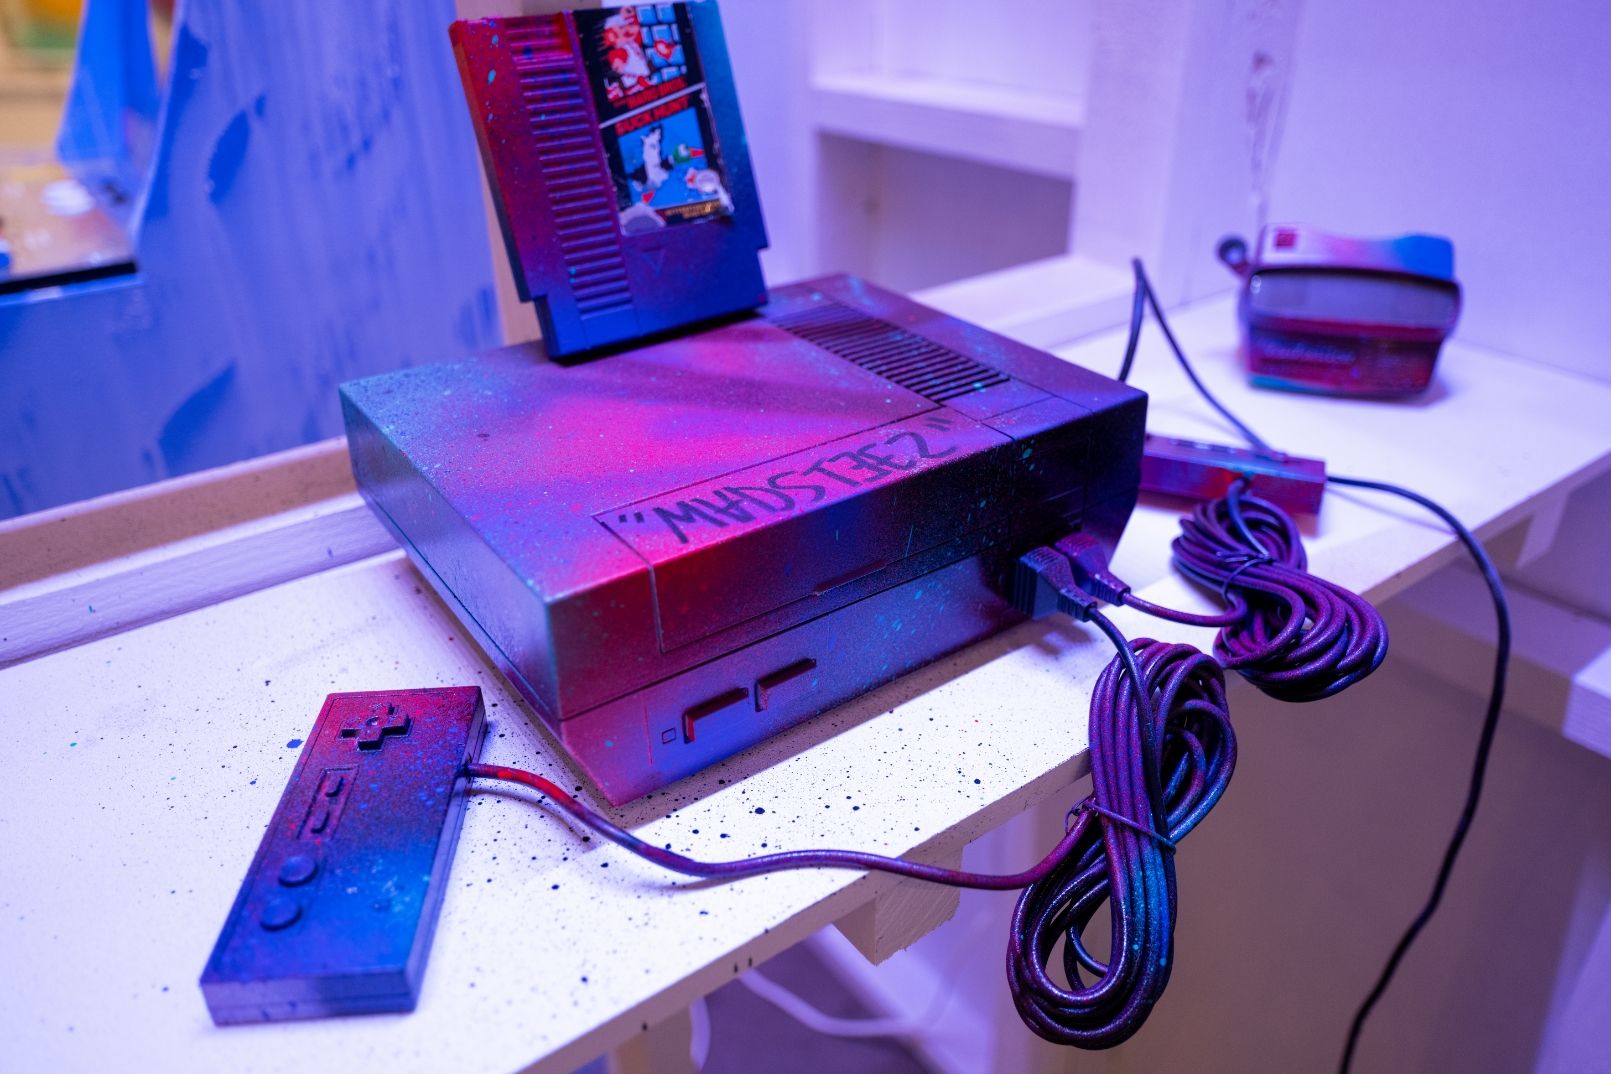 Spray painted Nintendo Entertainment System with Super Mario Bros / Duck Hunt Game